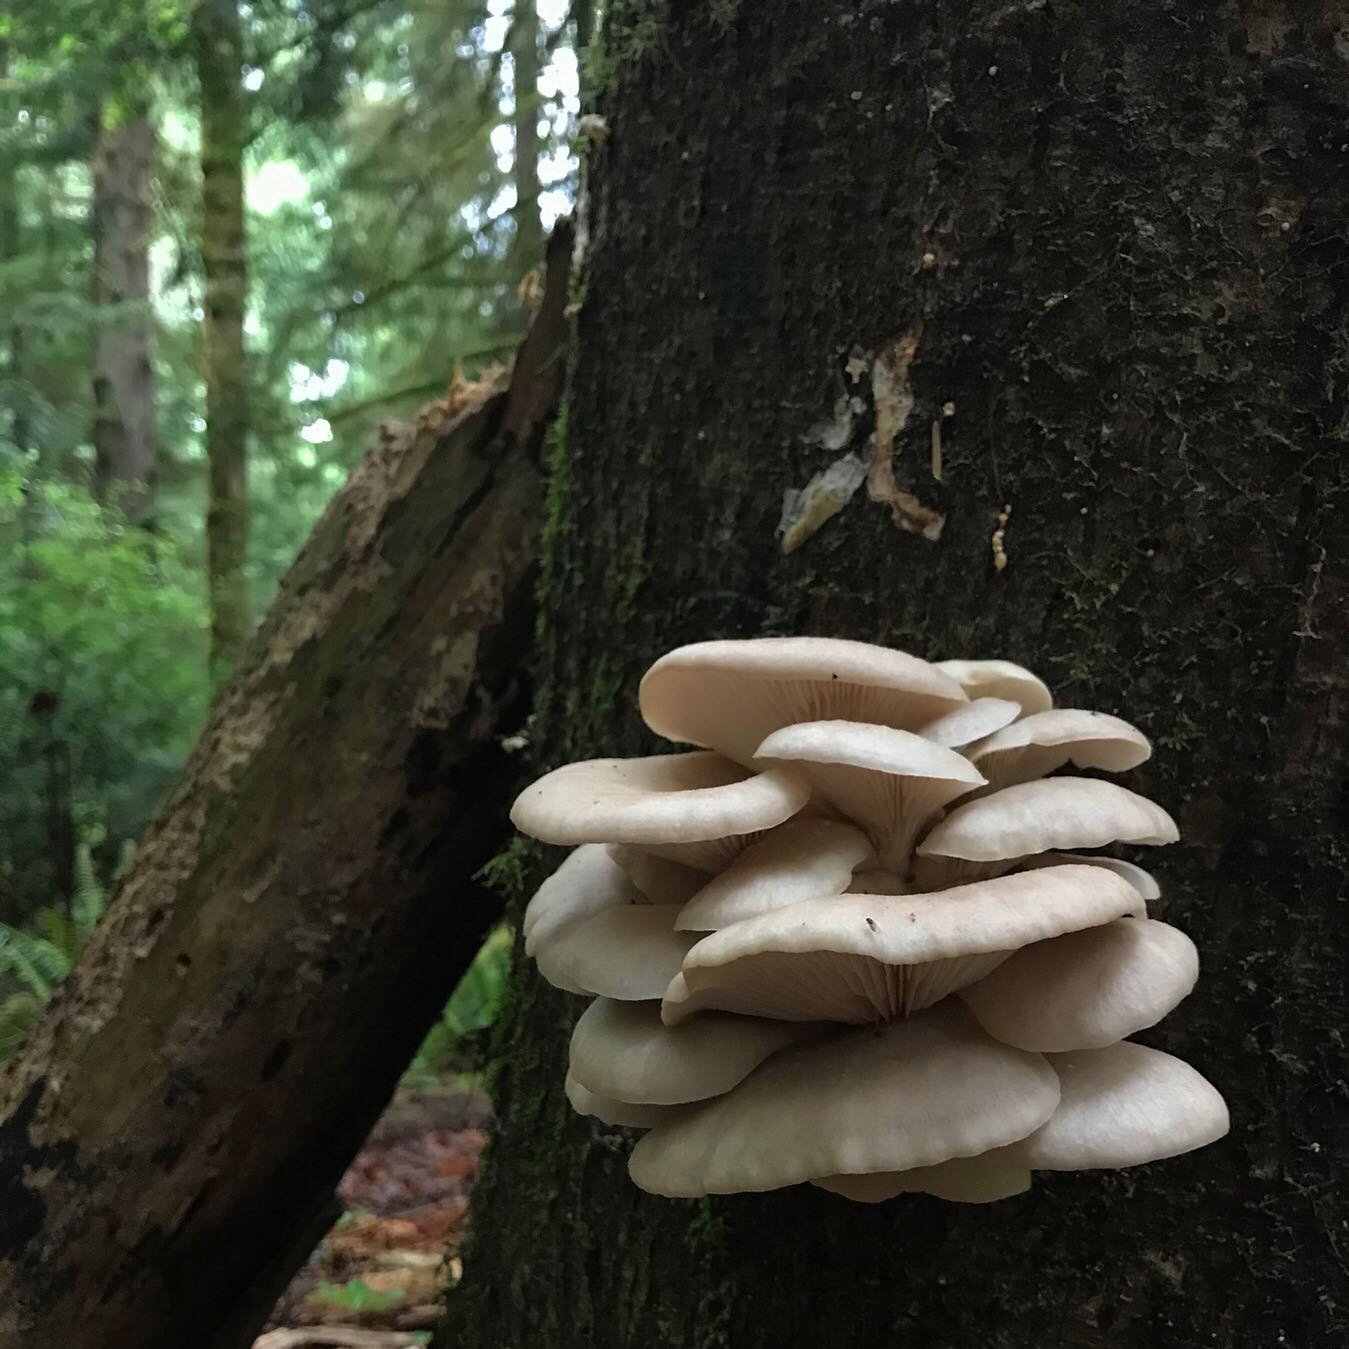 Mushrooms, trackers of the passage of time. Mushrooms, reminders that time is not linear but cyclical. In gratitude.⁠
⁠
You can learn about mushrooms and appreciate them without foraging them. Conversely, you can forage as a way to learn and apprecia